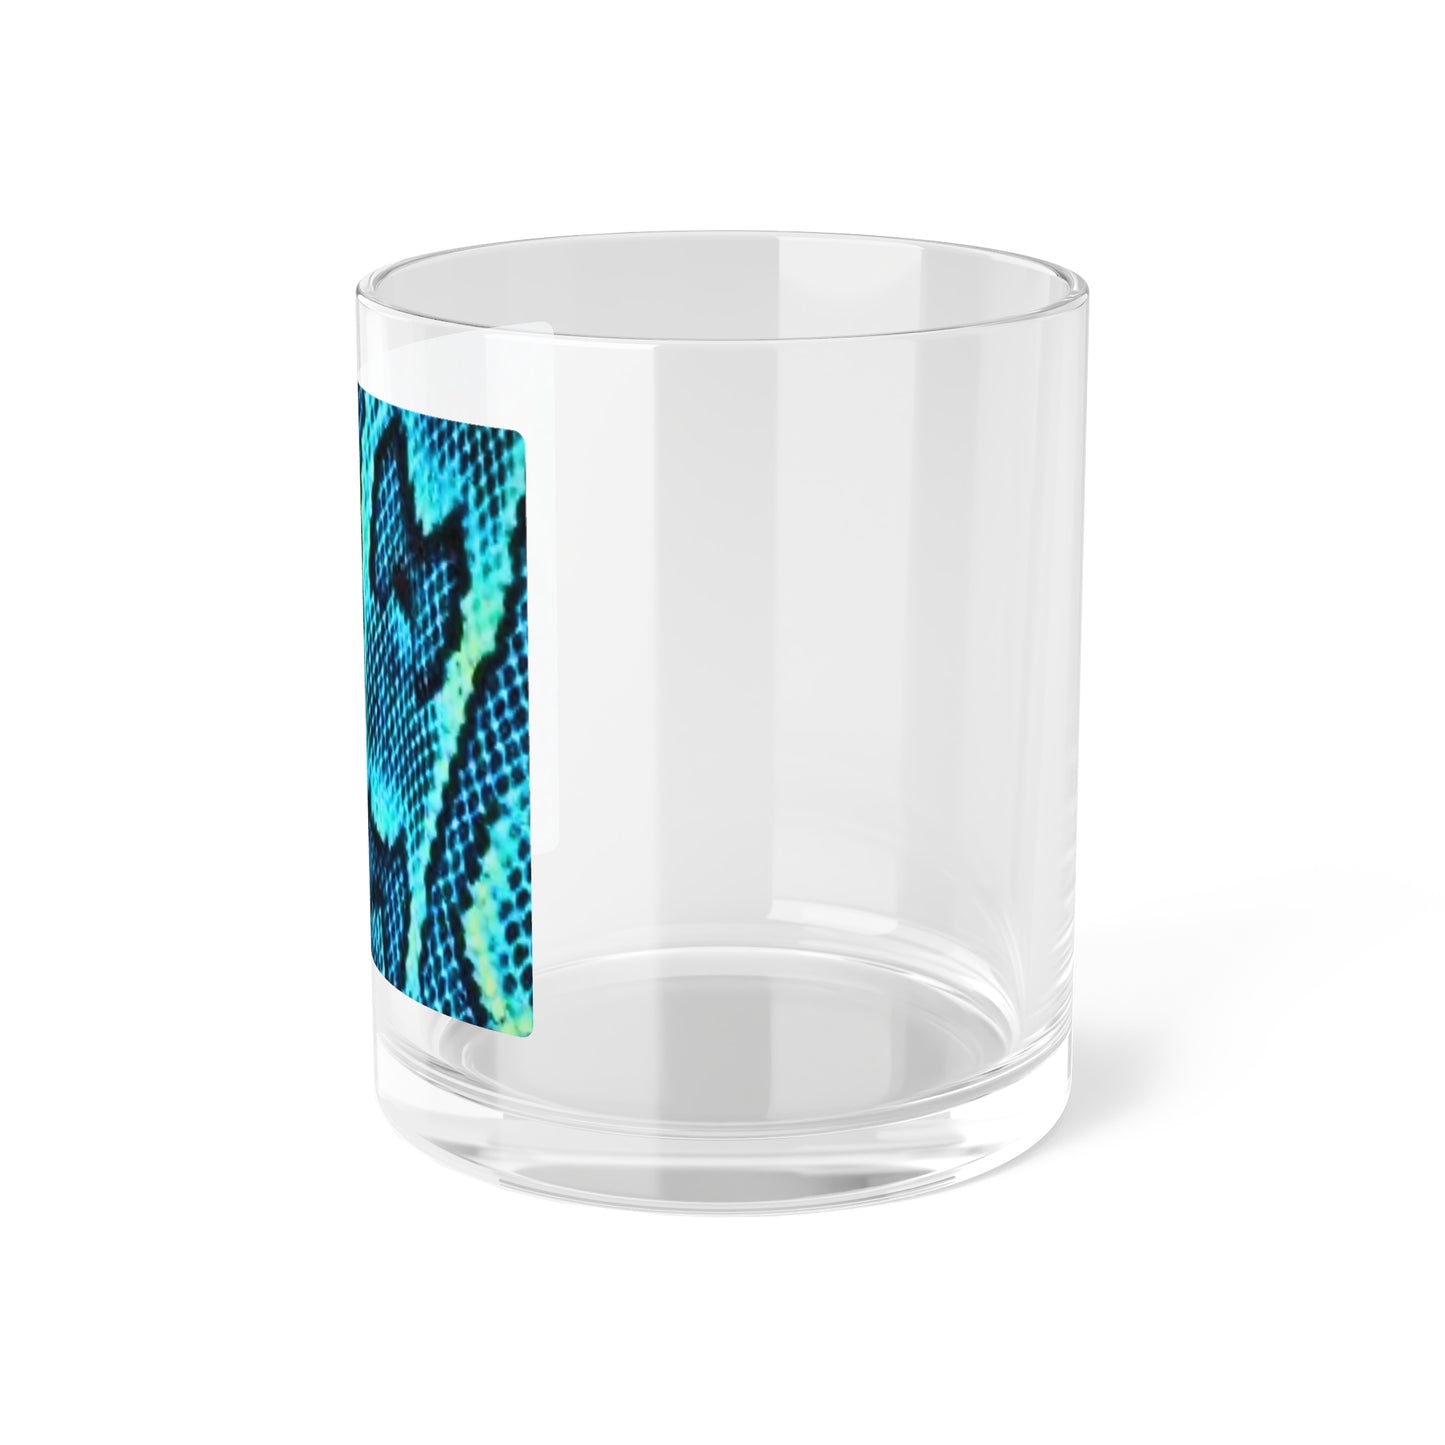 Turquoise Snakeskin Cocktail Party Beverage Entertaining Bar Glass